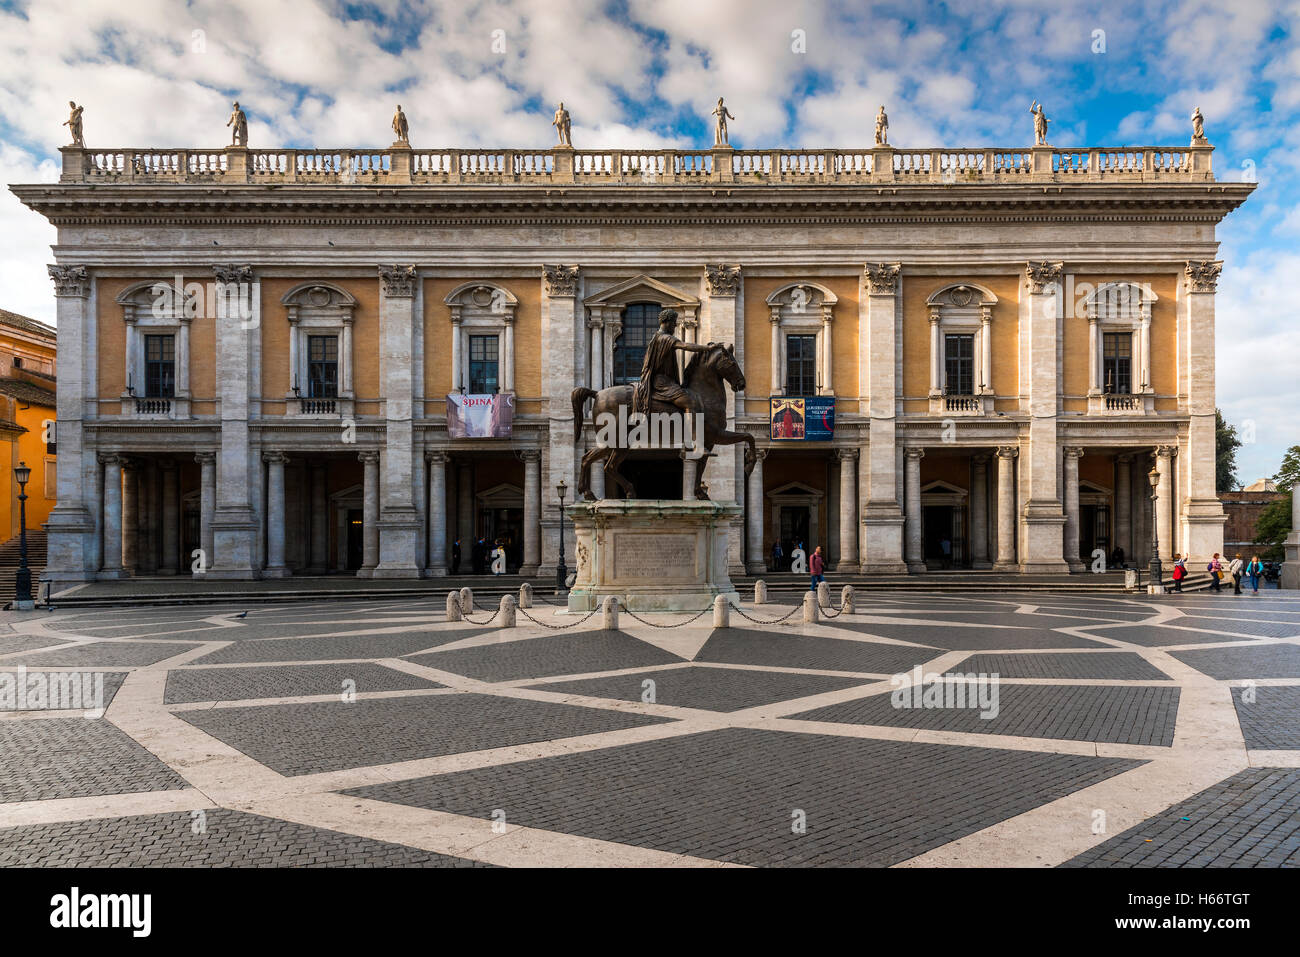 Piazza del Campidoglio with Capitoline Museums building and the replica of the equestrian statue of Marcus Aurelius, Rome, Italy Stock Photo